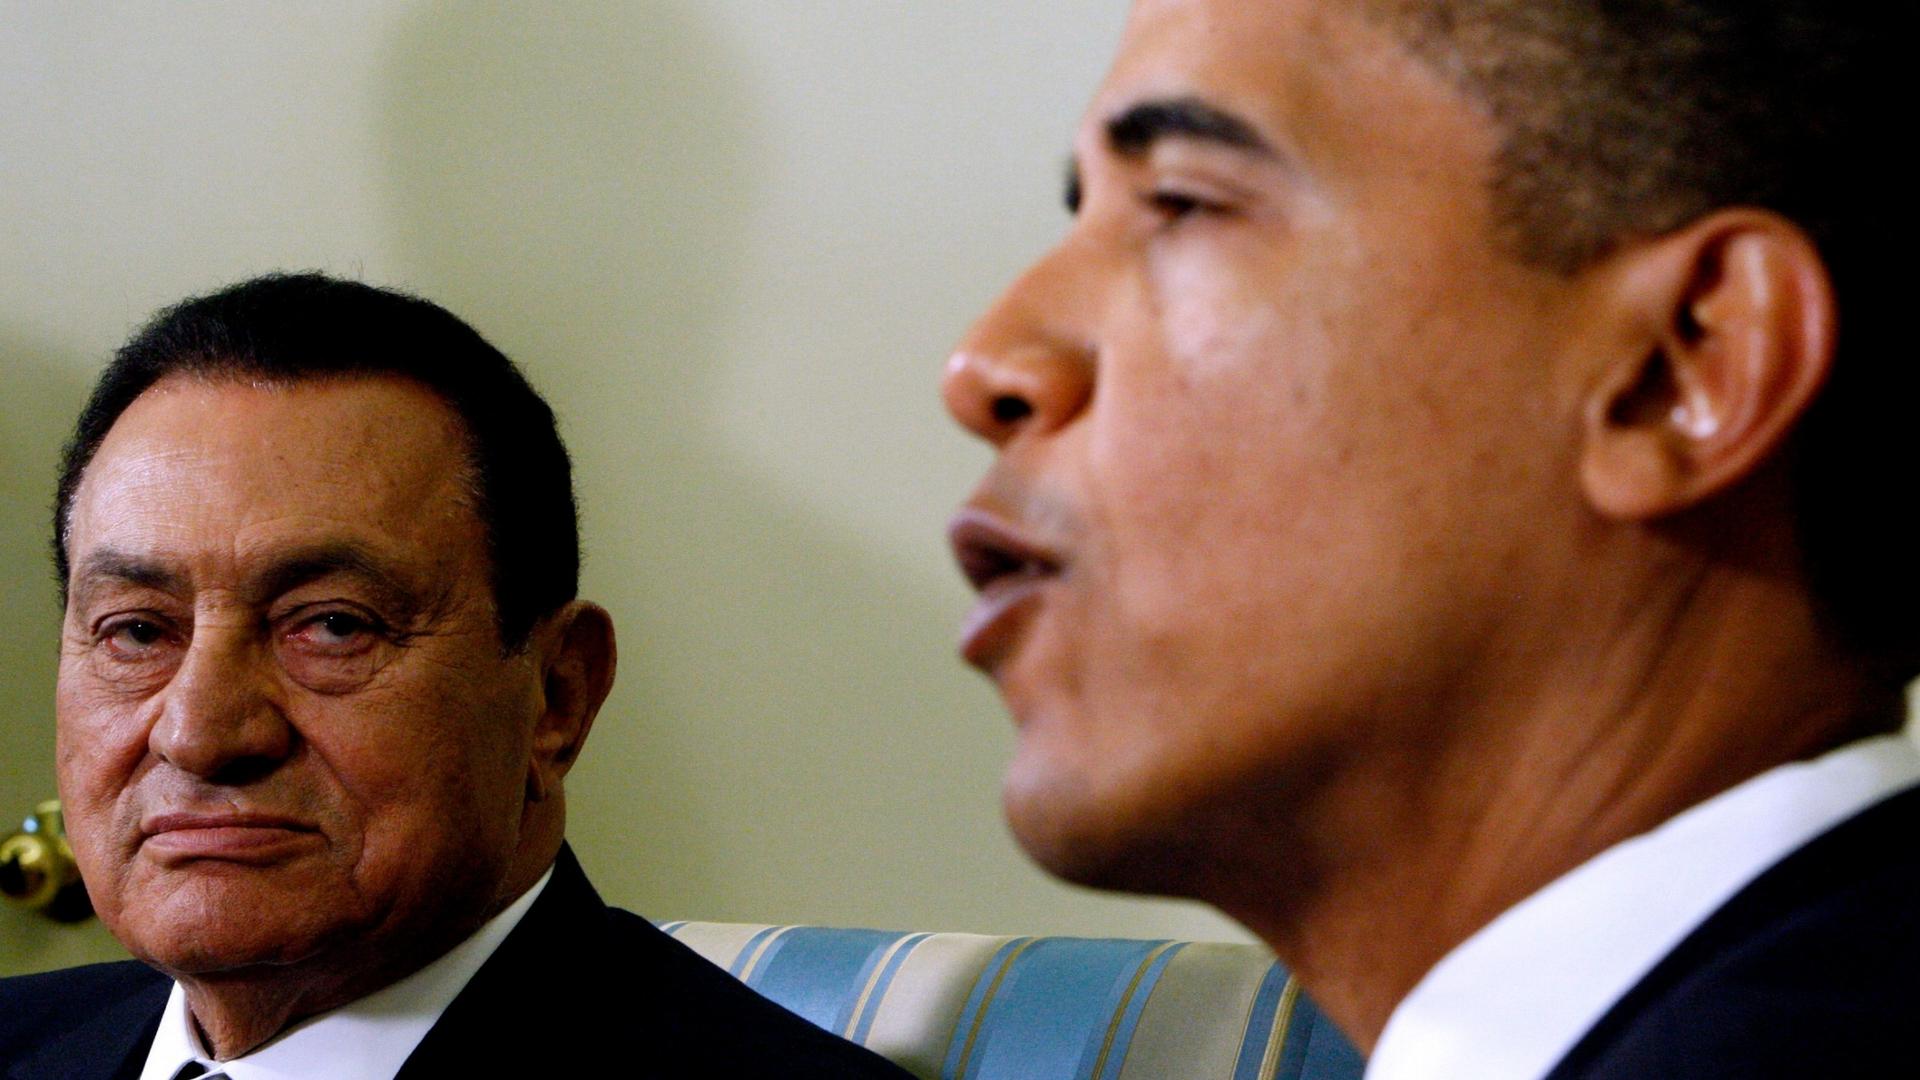 In this Aug. 18, 2009 file photo, US President Barack Obama meets with Egyptian President Hosni Mubarak, in the Oval Office of the White House in Washington.